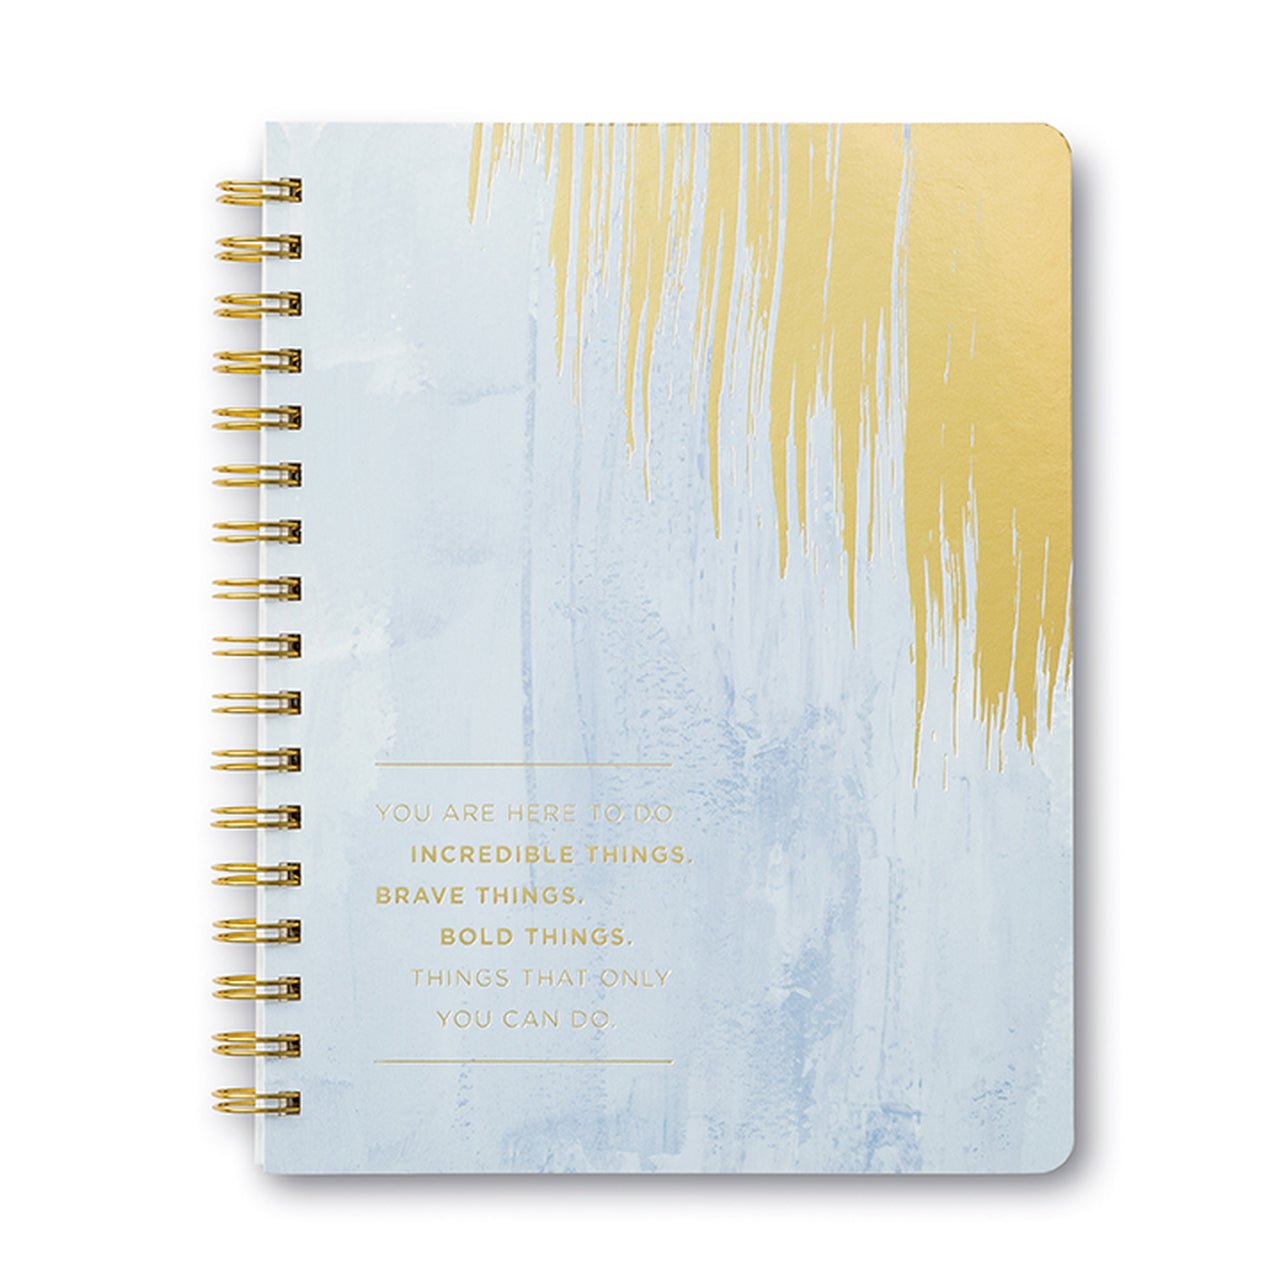 You Are Here To Do Incredible Things Spiral Notebook - The Kindness Cause